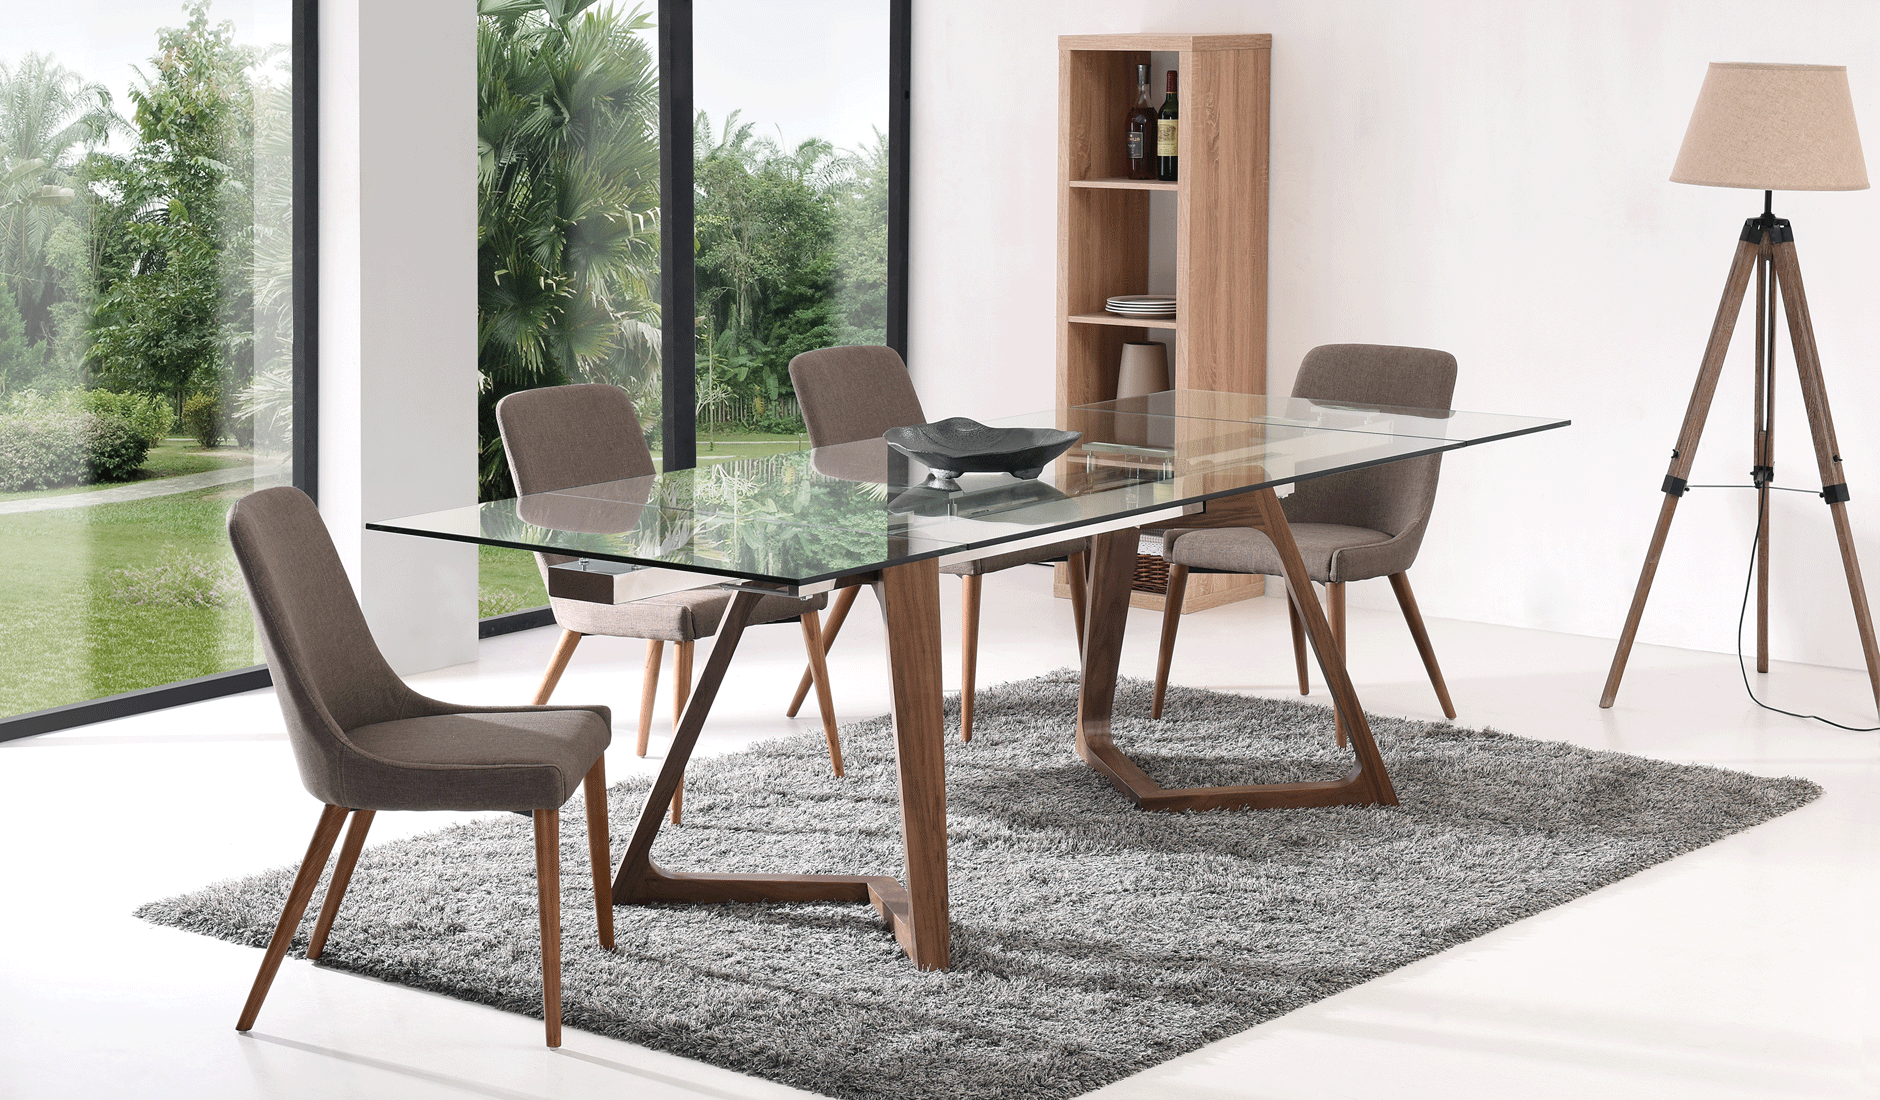 Wallunits Hallway Console tables and Mirrors 8811 Table and 941 Chairs